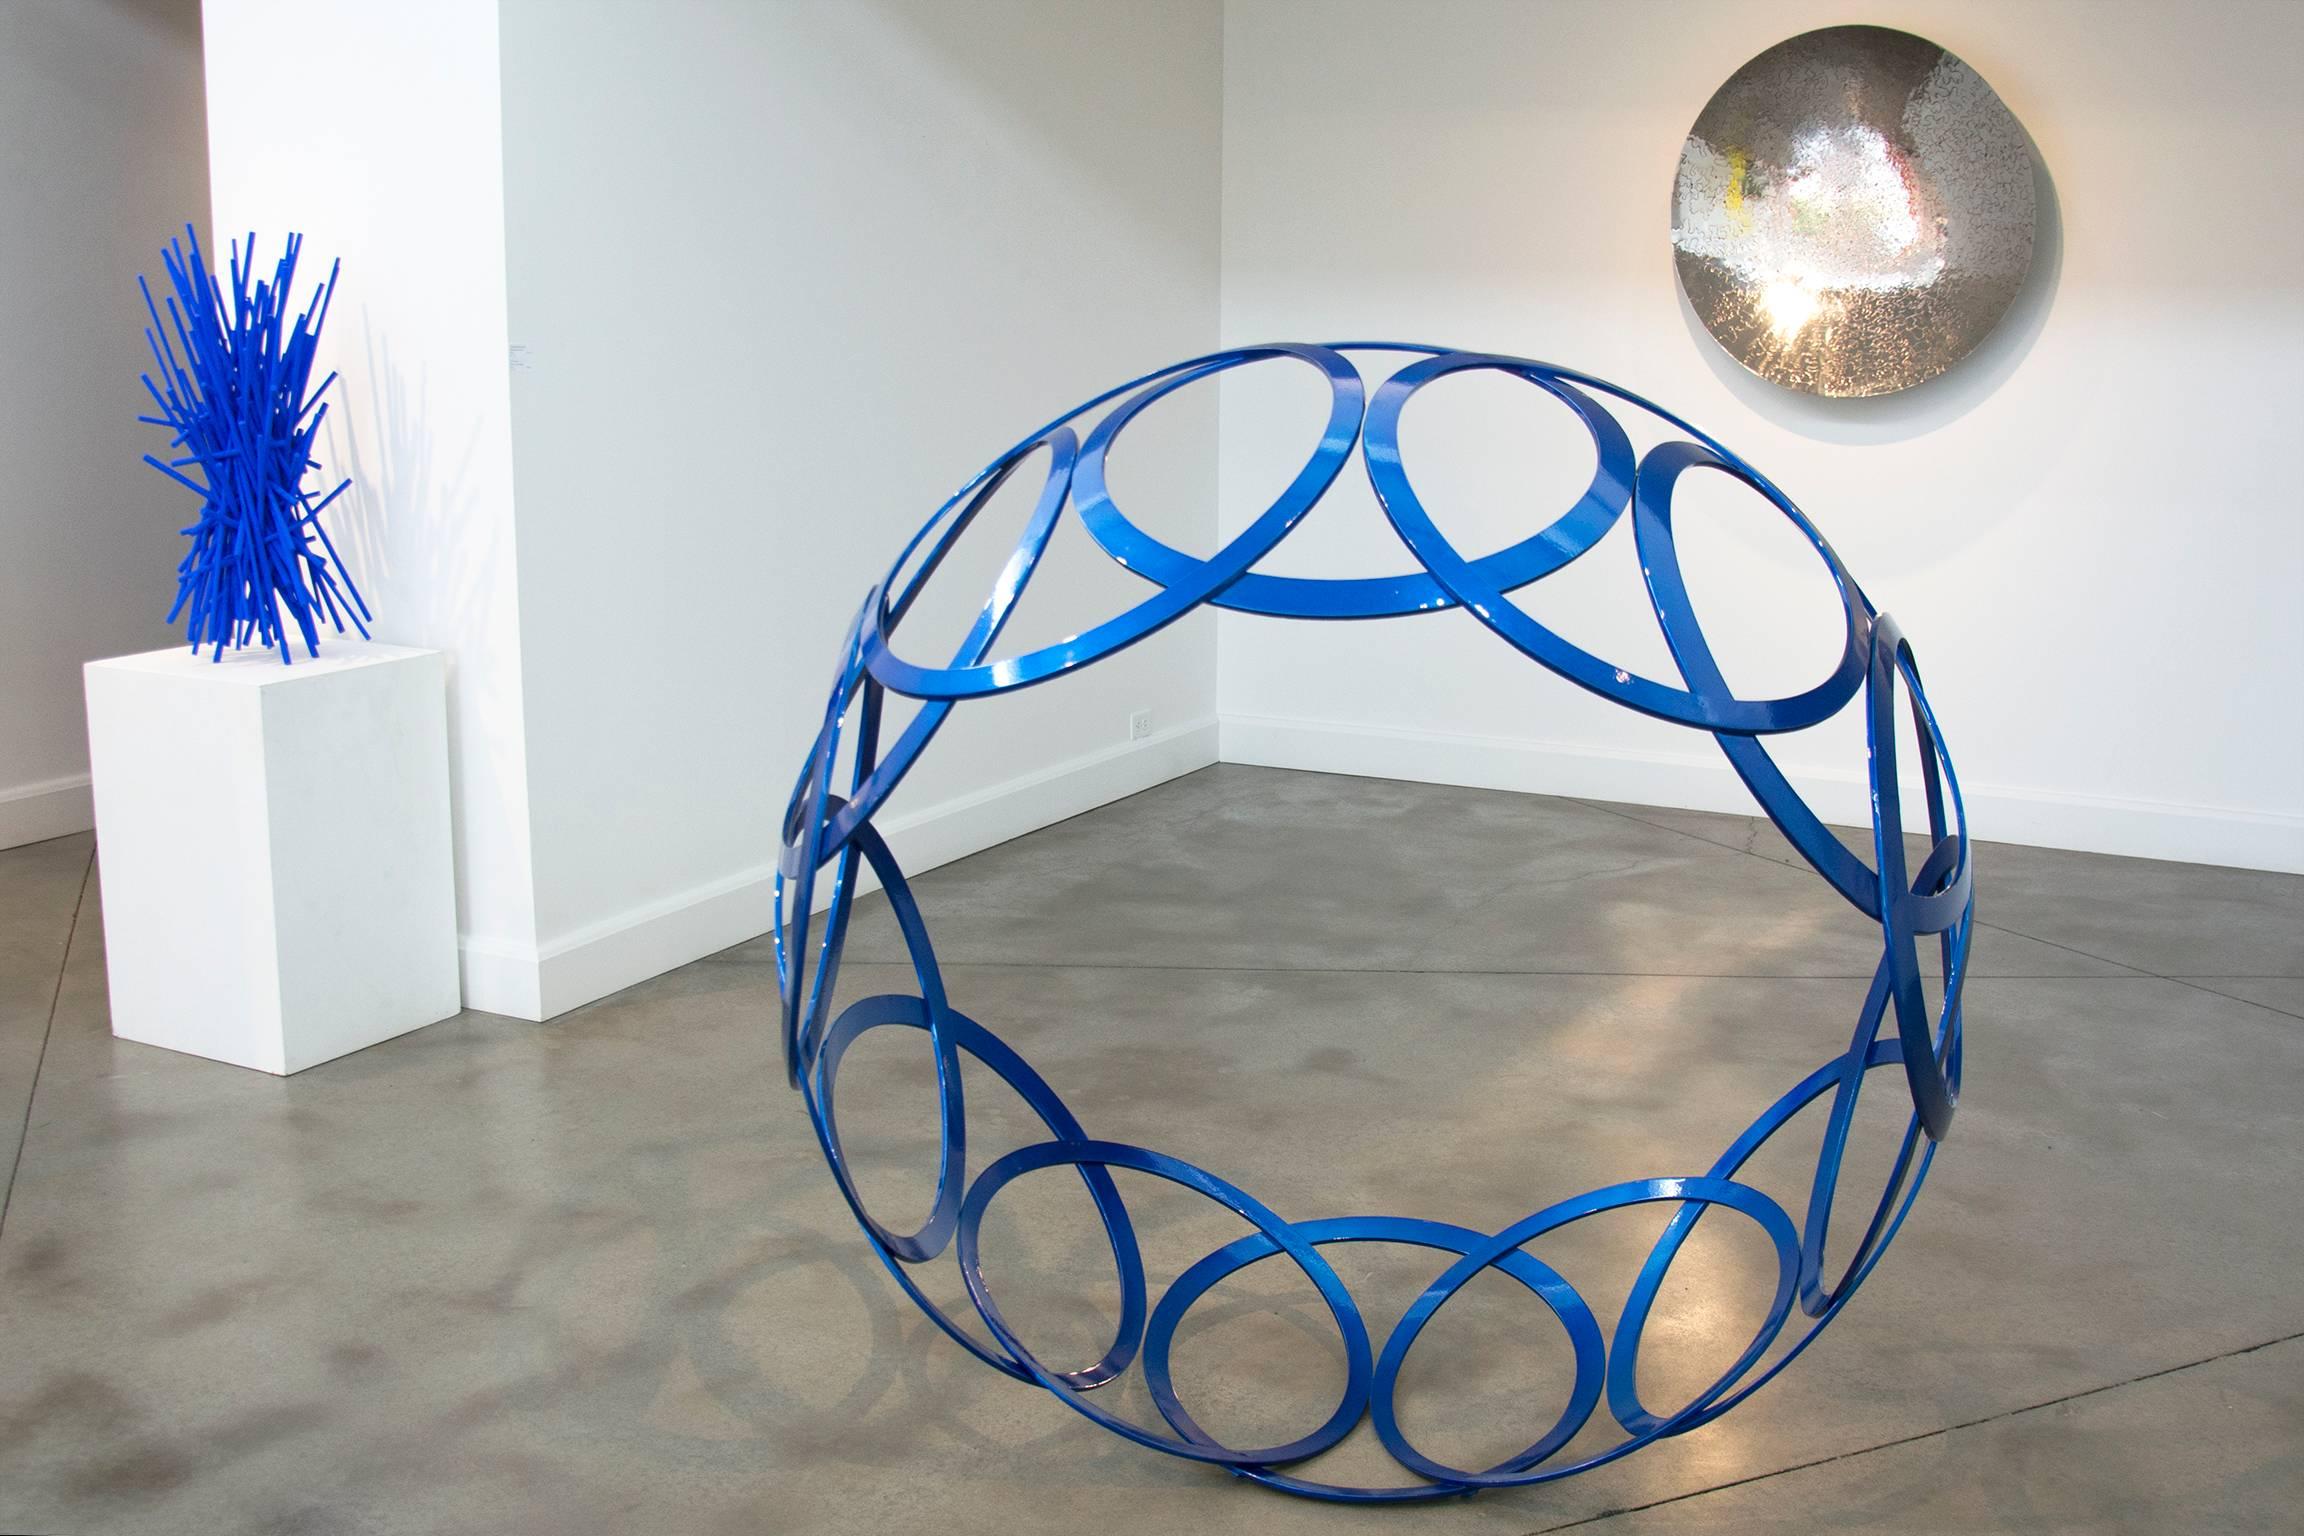 Circular Motion - large, bright blue, geometric abstract, coated steel sculpture - Contemporary Sculpture by Shayne Dark